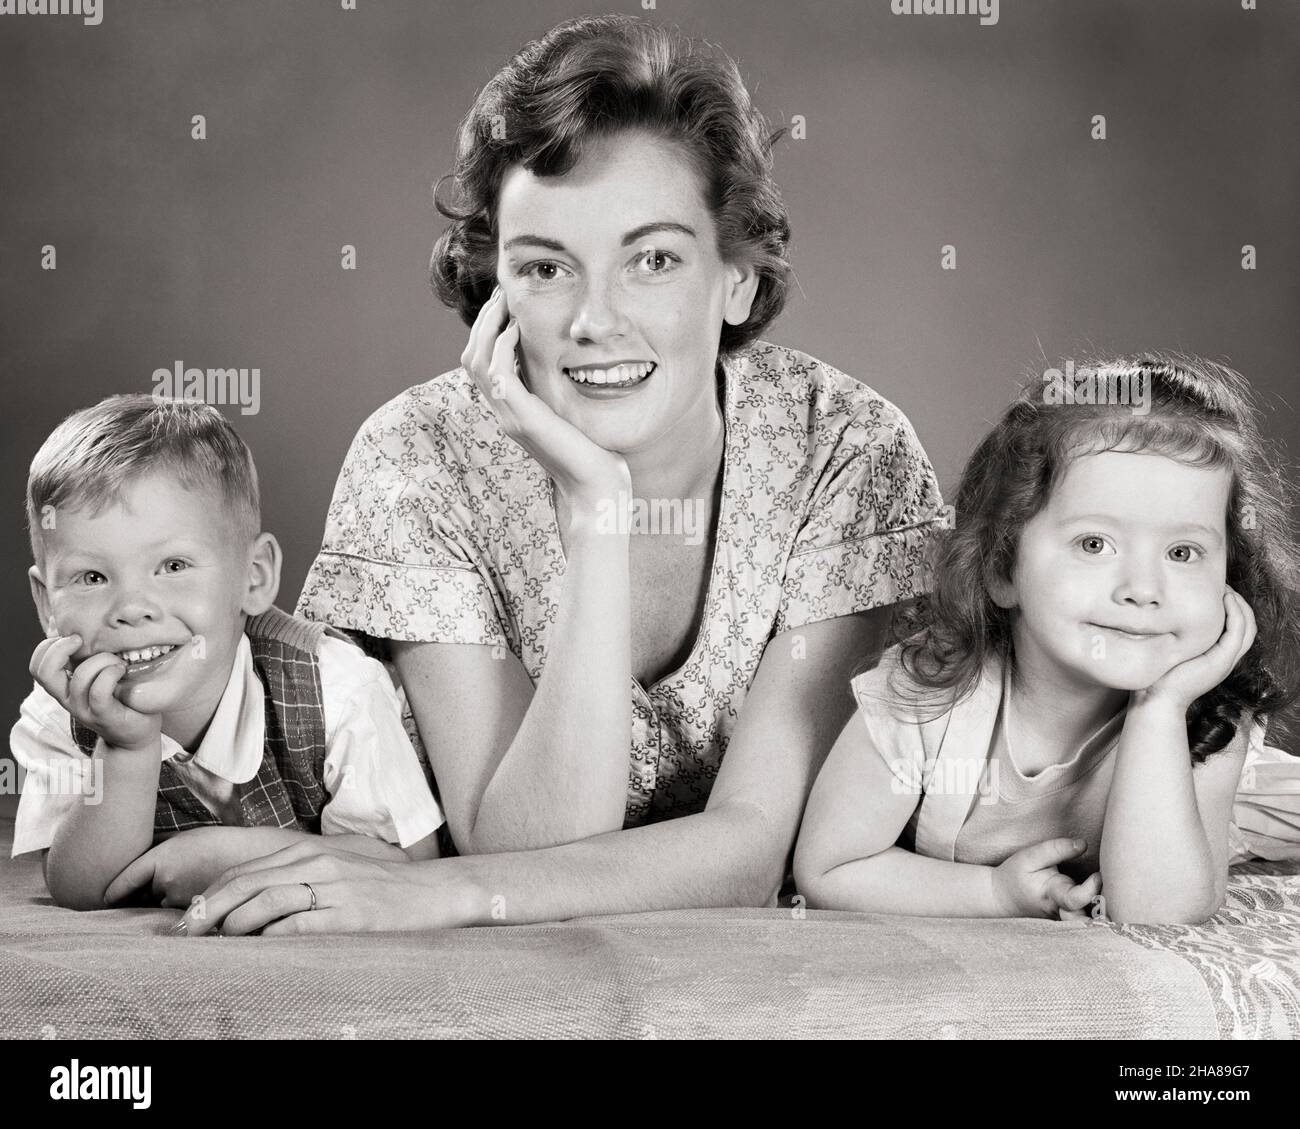 1950s PORTRAIT SMILING WOMAN MOTHER AND BOY SON BROTHER AND GIRL DAUGHTER SISTER ALL LEANING ON ELBOWS LOOKING AT CAMERA - j6308 HAR001 HARS 1 JUVENILE YOUNG ADULT TEAMWORK SONS PLEASED FAMILIES JOY LIFESTYLE FEMALES BROTHERS HEALTHINESS HOME LIFE COPY SPACE FRIENDSHIP LADIES DAUGHTERS PERSONS MALES ALL SIBLINGS SISTERS B&W EYE CONTACT HAPPINESS HEAD AND SHOULDERS CHEERFUL AND ON SIBLING SMILES ELBOWS CONNECTION JOYFUL COOPERATION JUVENILES MOMS TOGETHERNESS YOUNG ADULT WOMAN BLACK AND WHITE CAUCASIAN ETHNICITY HAR001 OLD FASHIONED Stock Photo